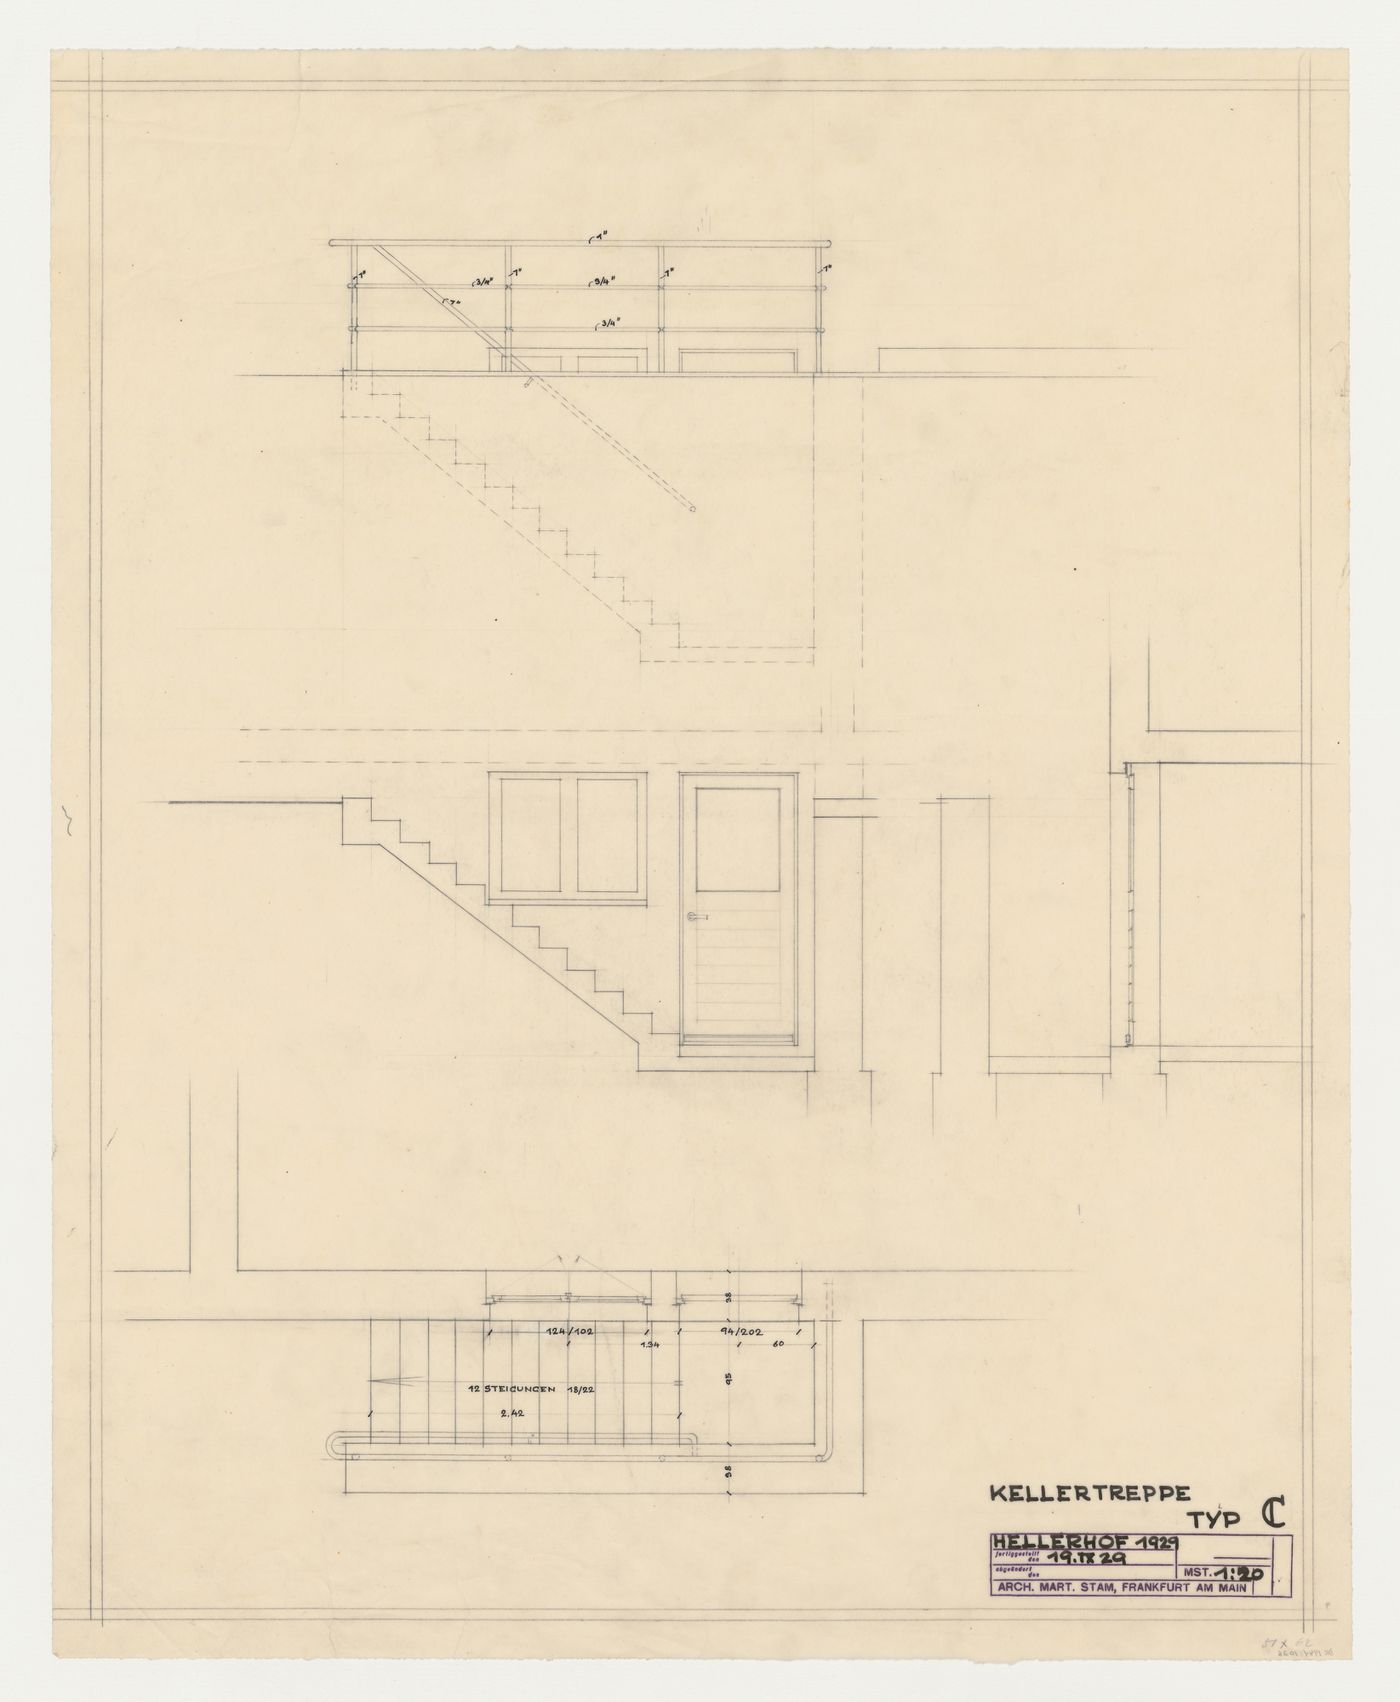 Plan, section, and elevation for a basement staircase for a type C housing unit, Hellerhof Housing Estate, Frankfurt am Main, Germany